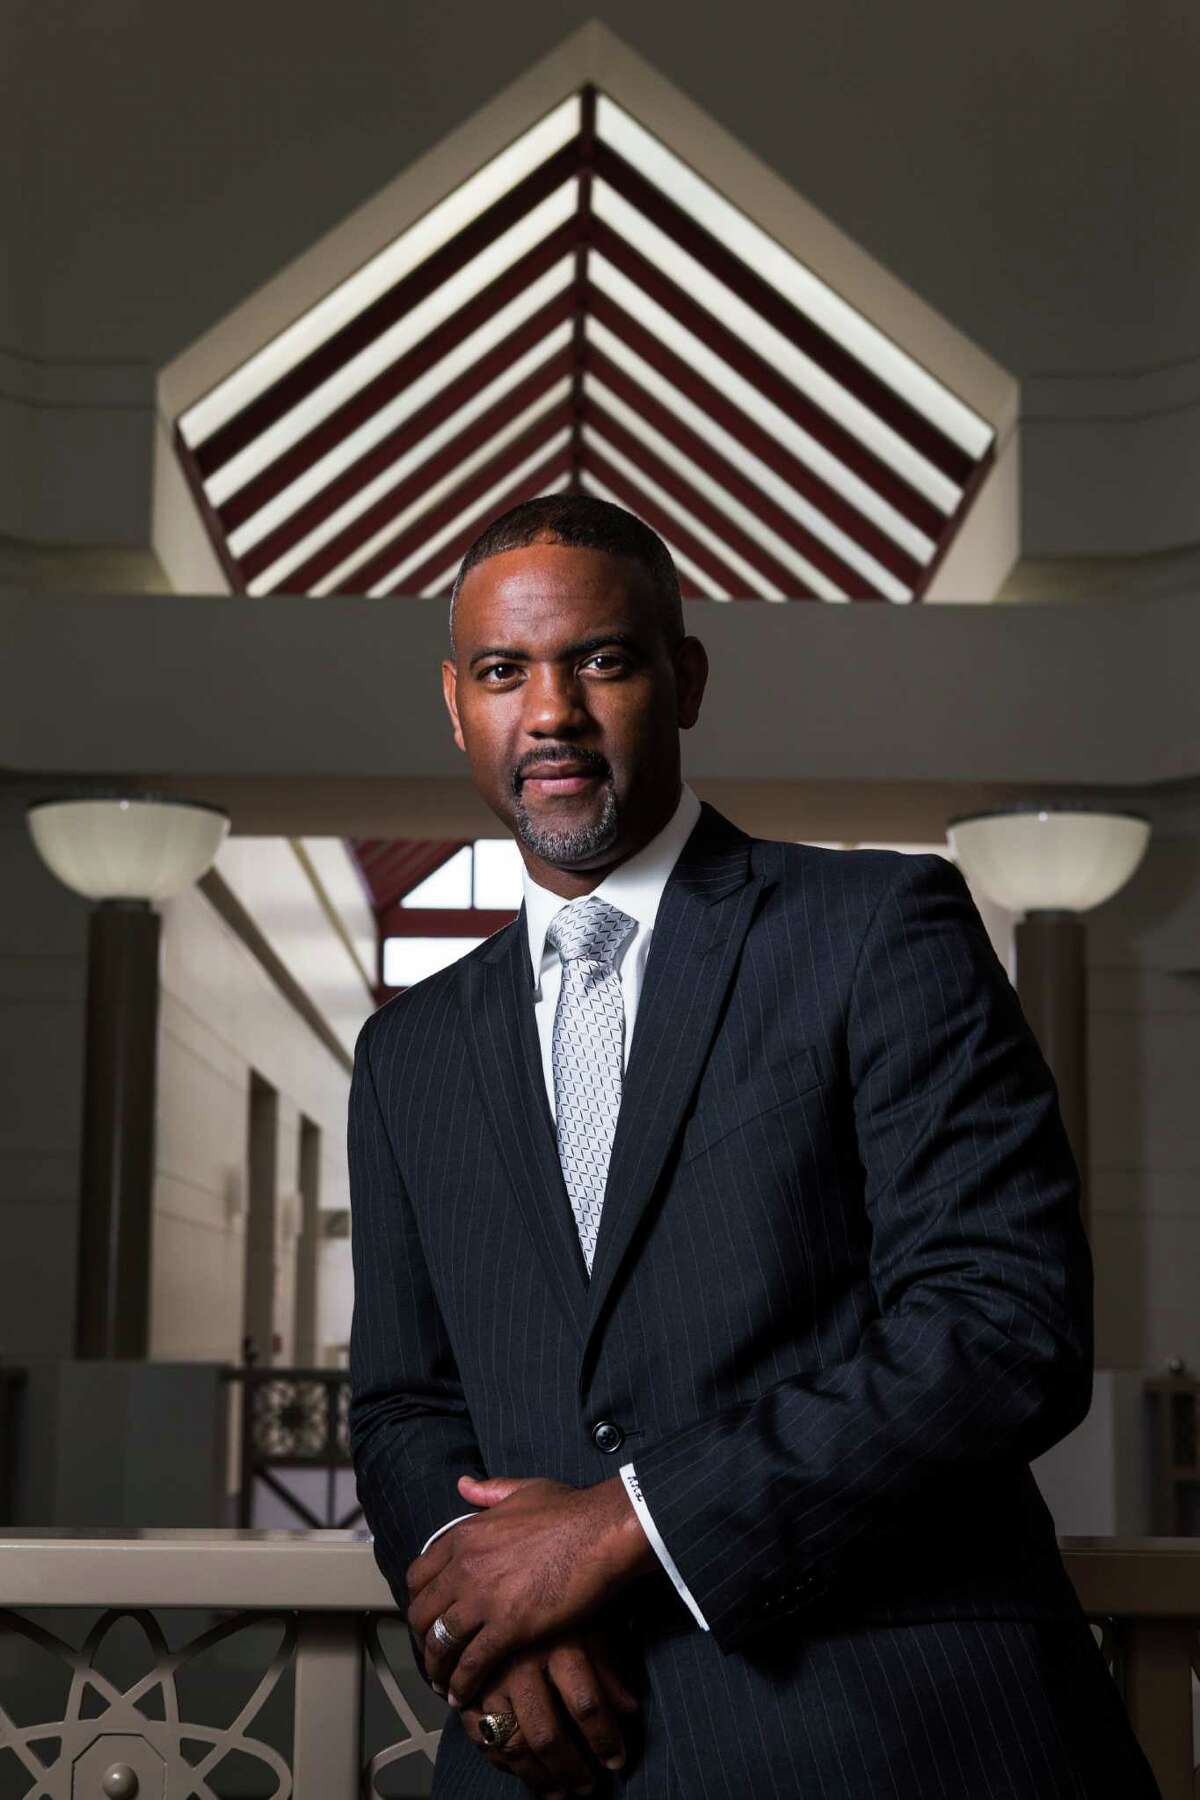 Austin Lane, who has been named Texas Southern University's next president, has wanted to be a part of the TSU community for three decades.